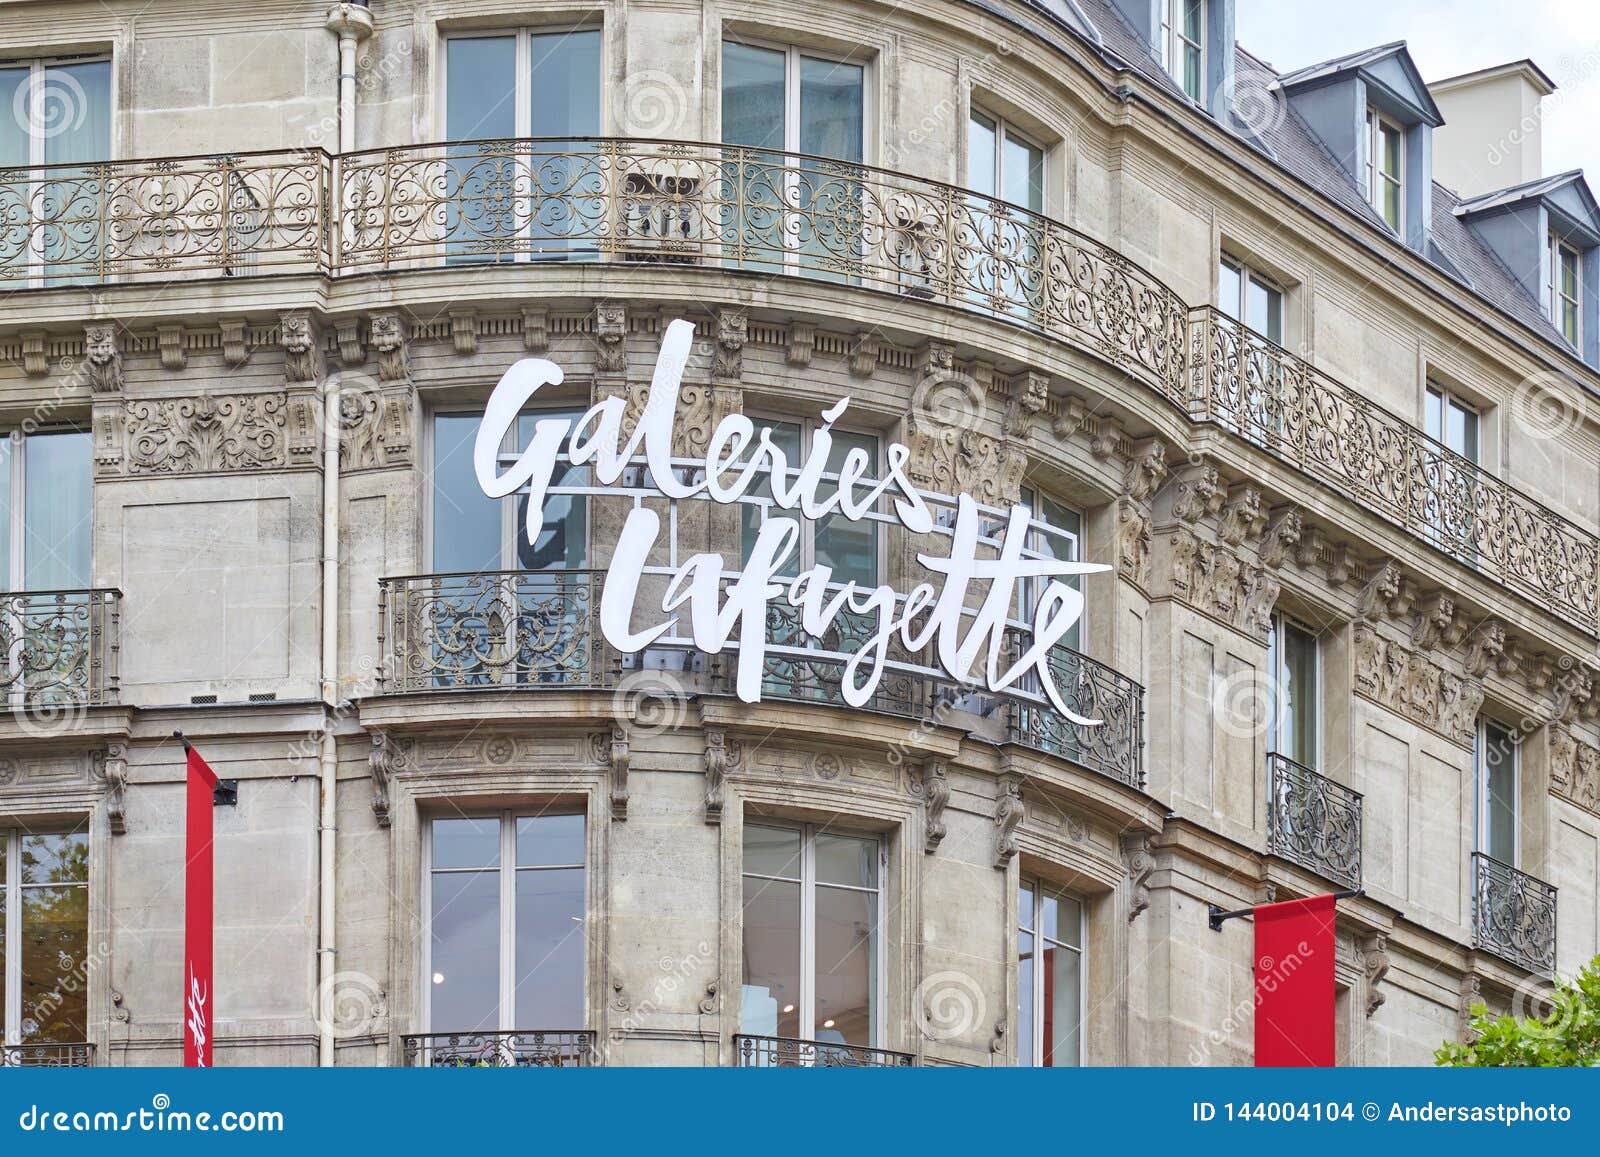 Galeries Lafayette Luxury Department Store Sign in Paris, France ...